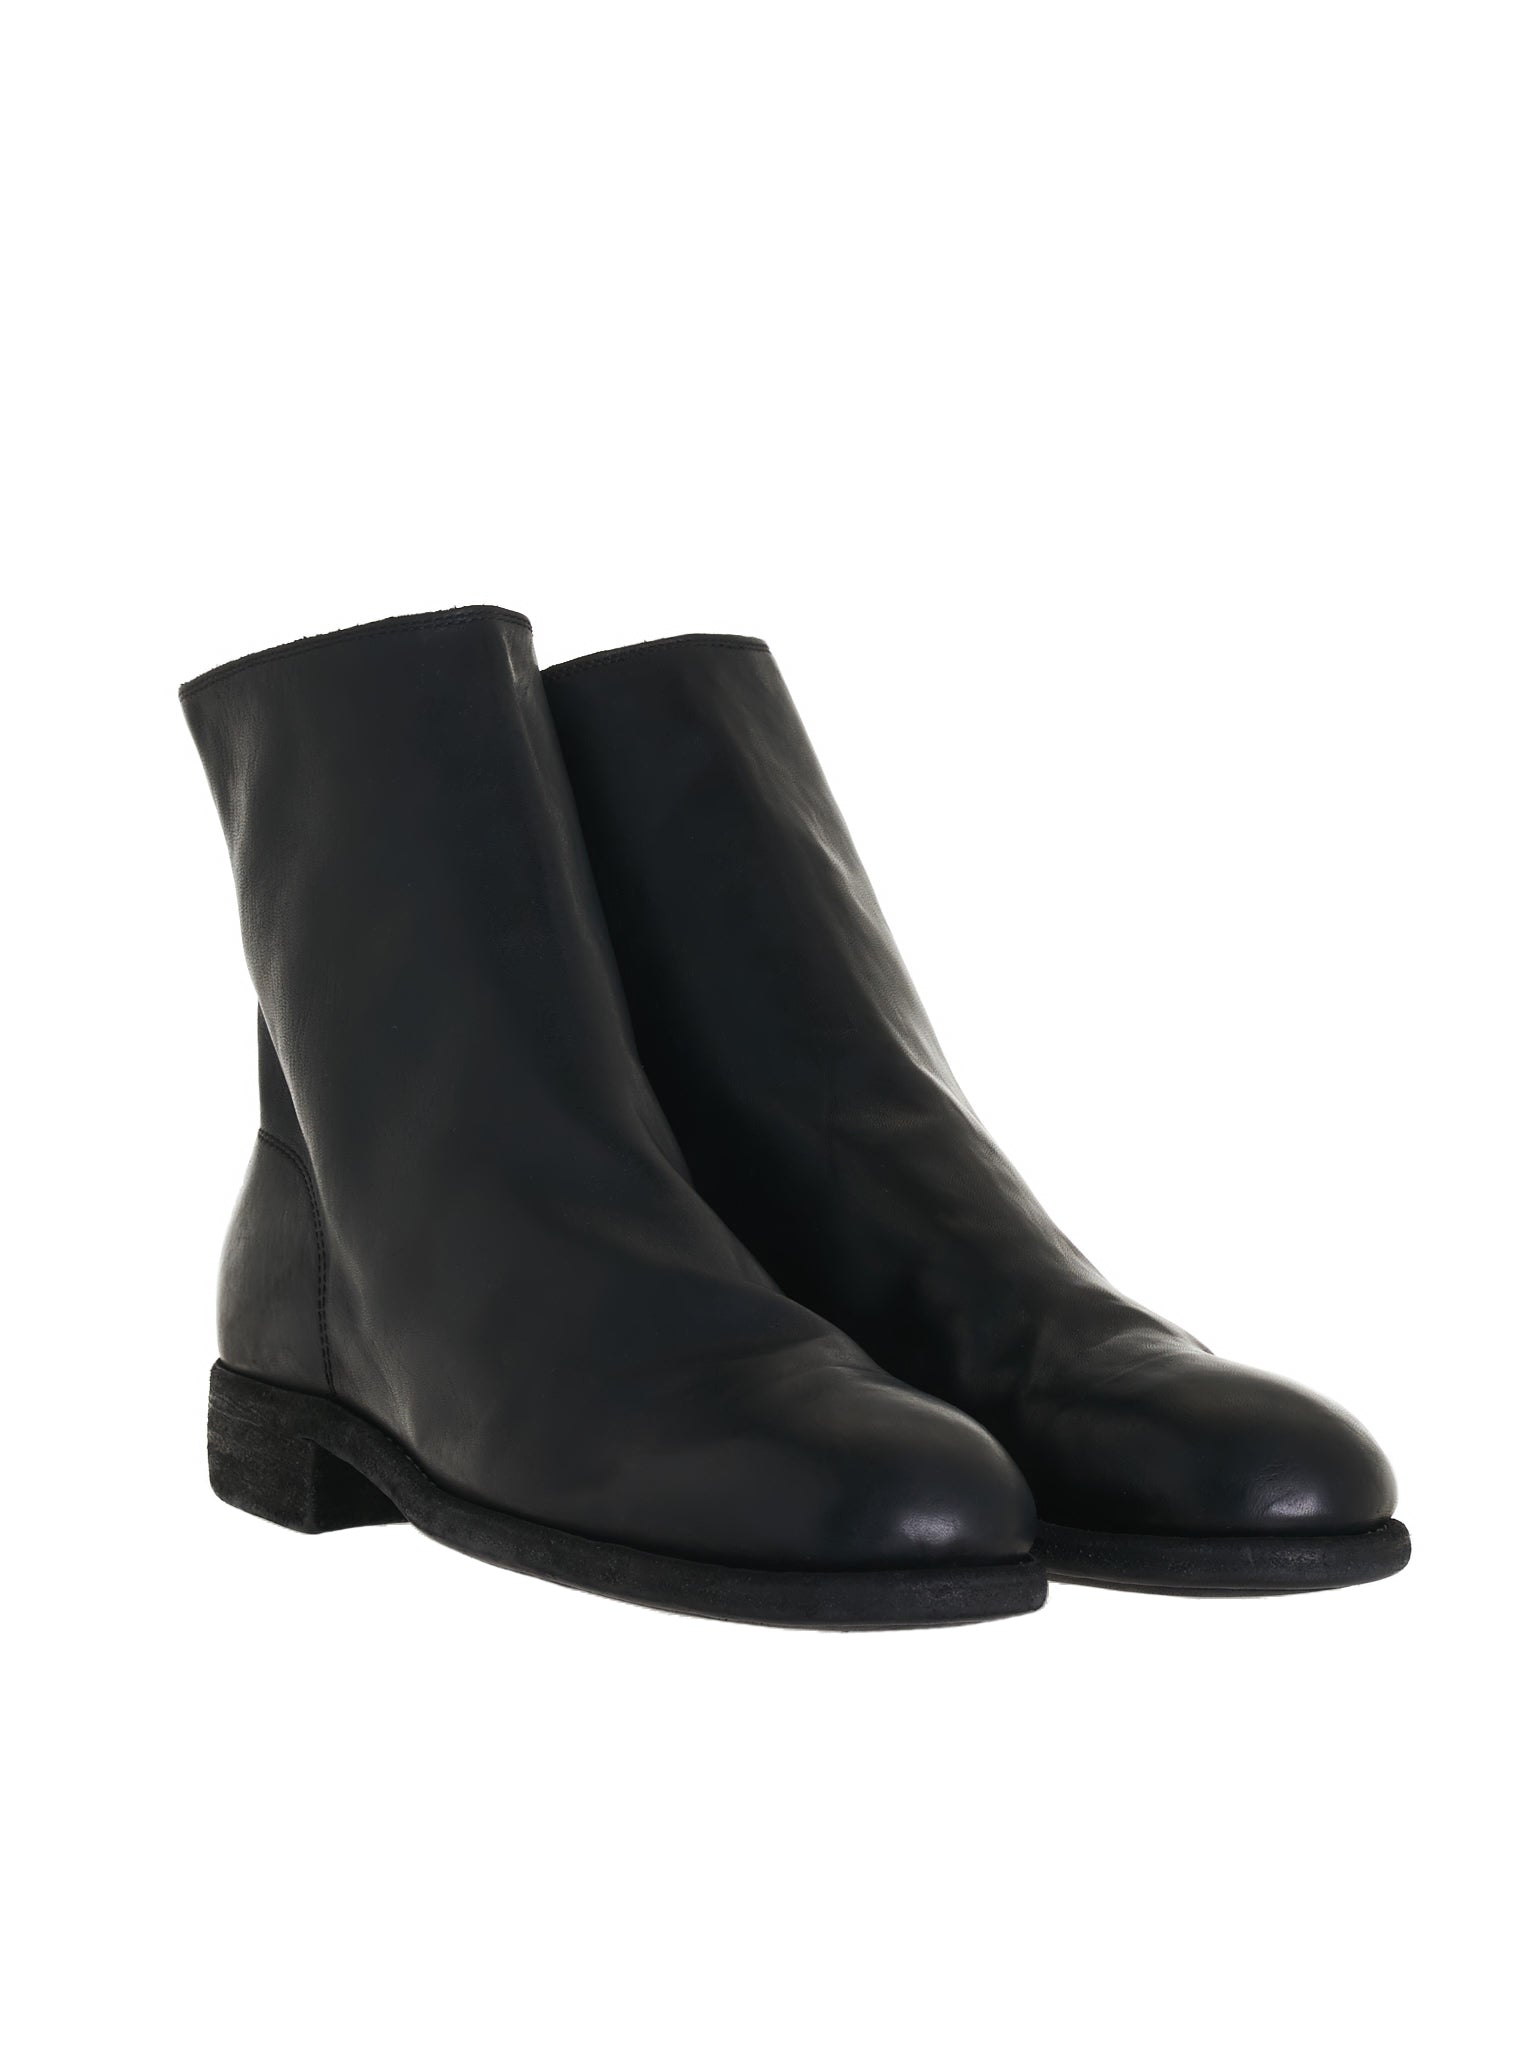 986 Soft Horse Leather Boots (986-SOFT-HORSE-FG-BLKT)